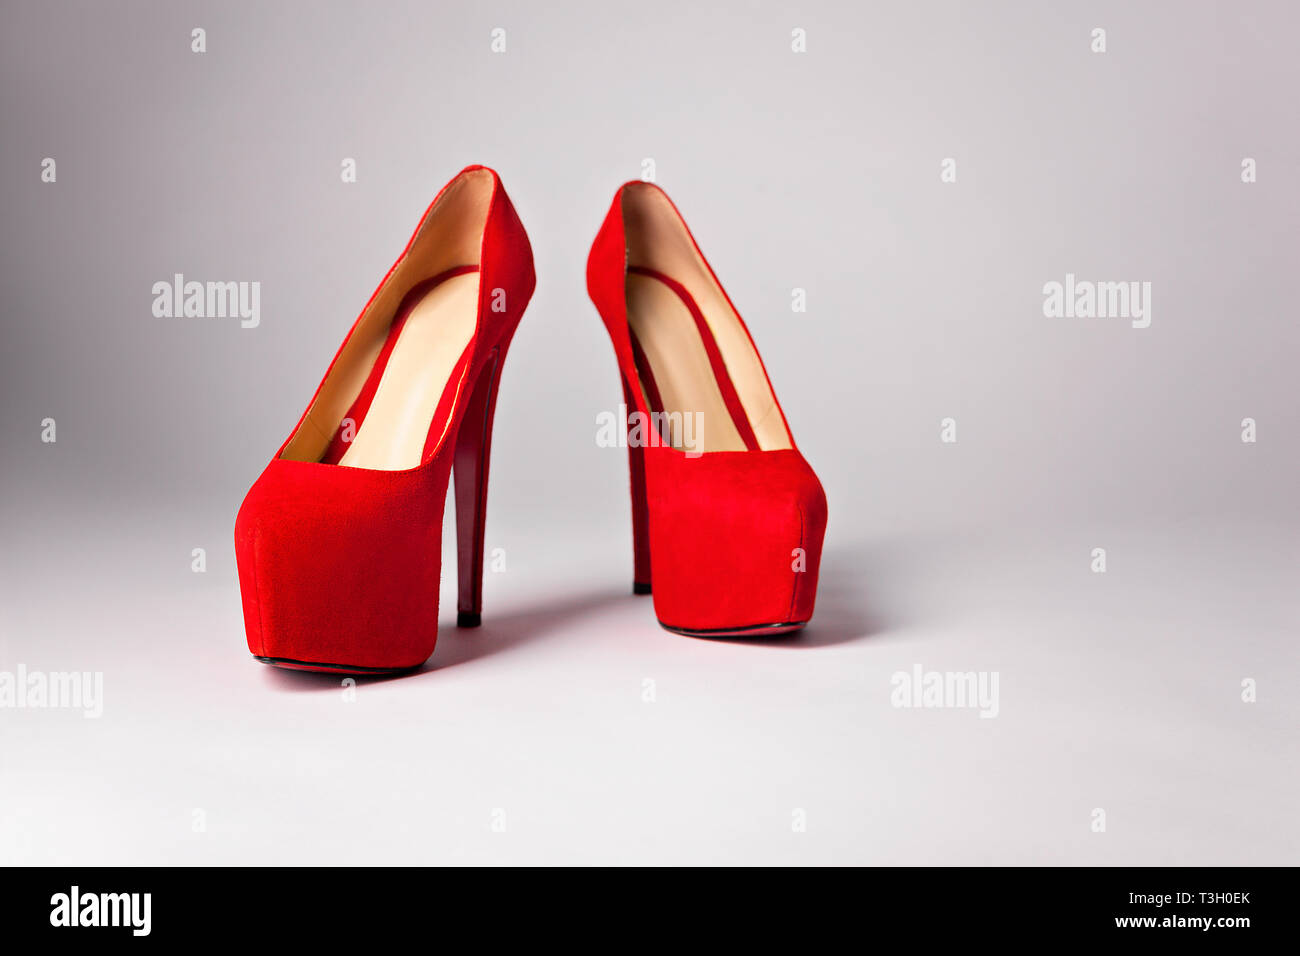 women's shoes with high heels. On a white background Stock Photo